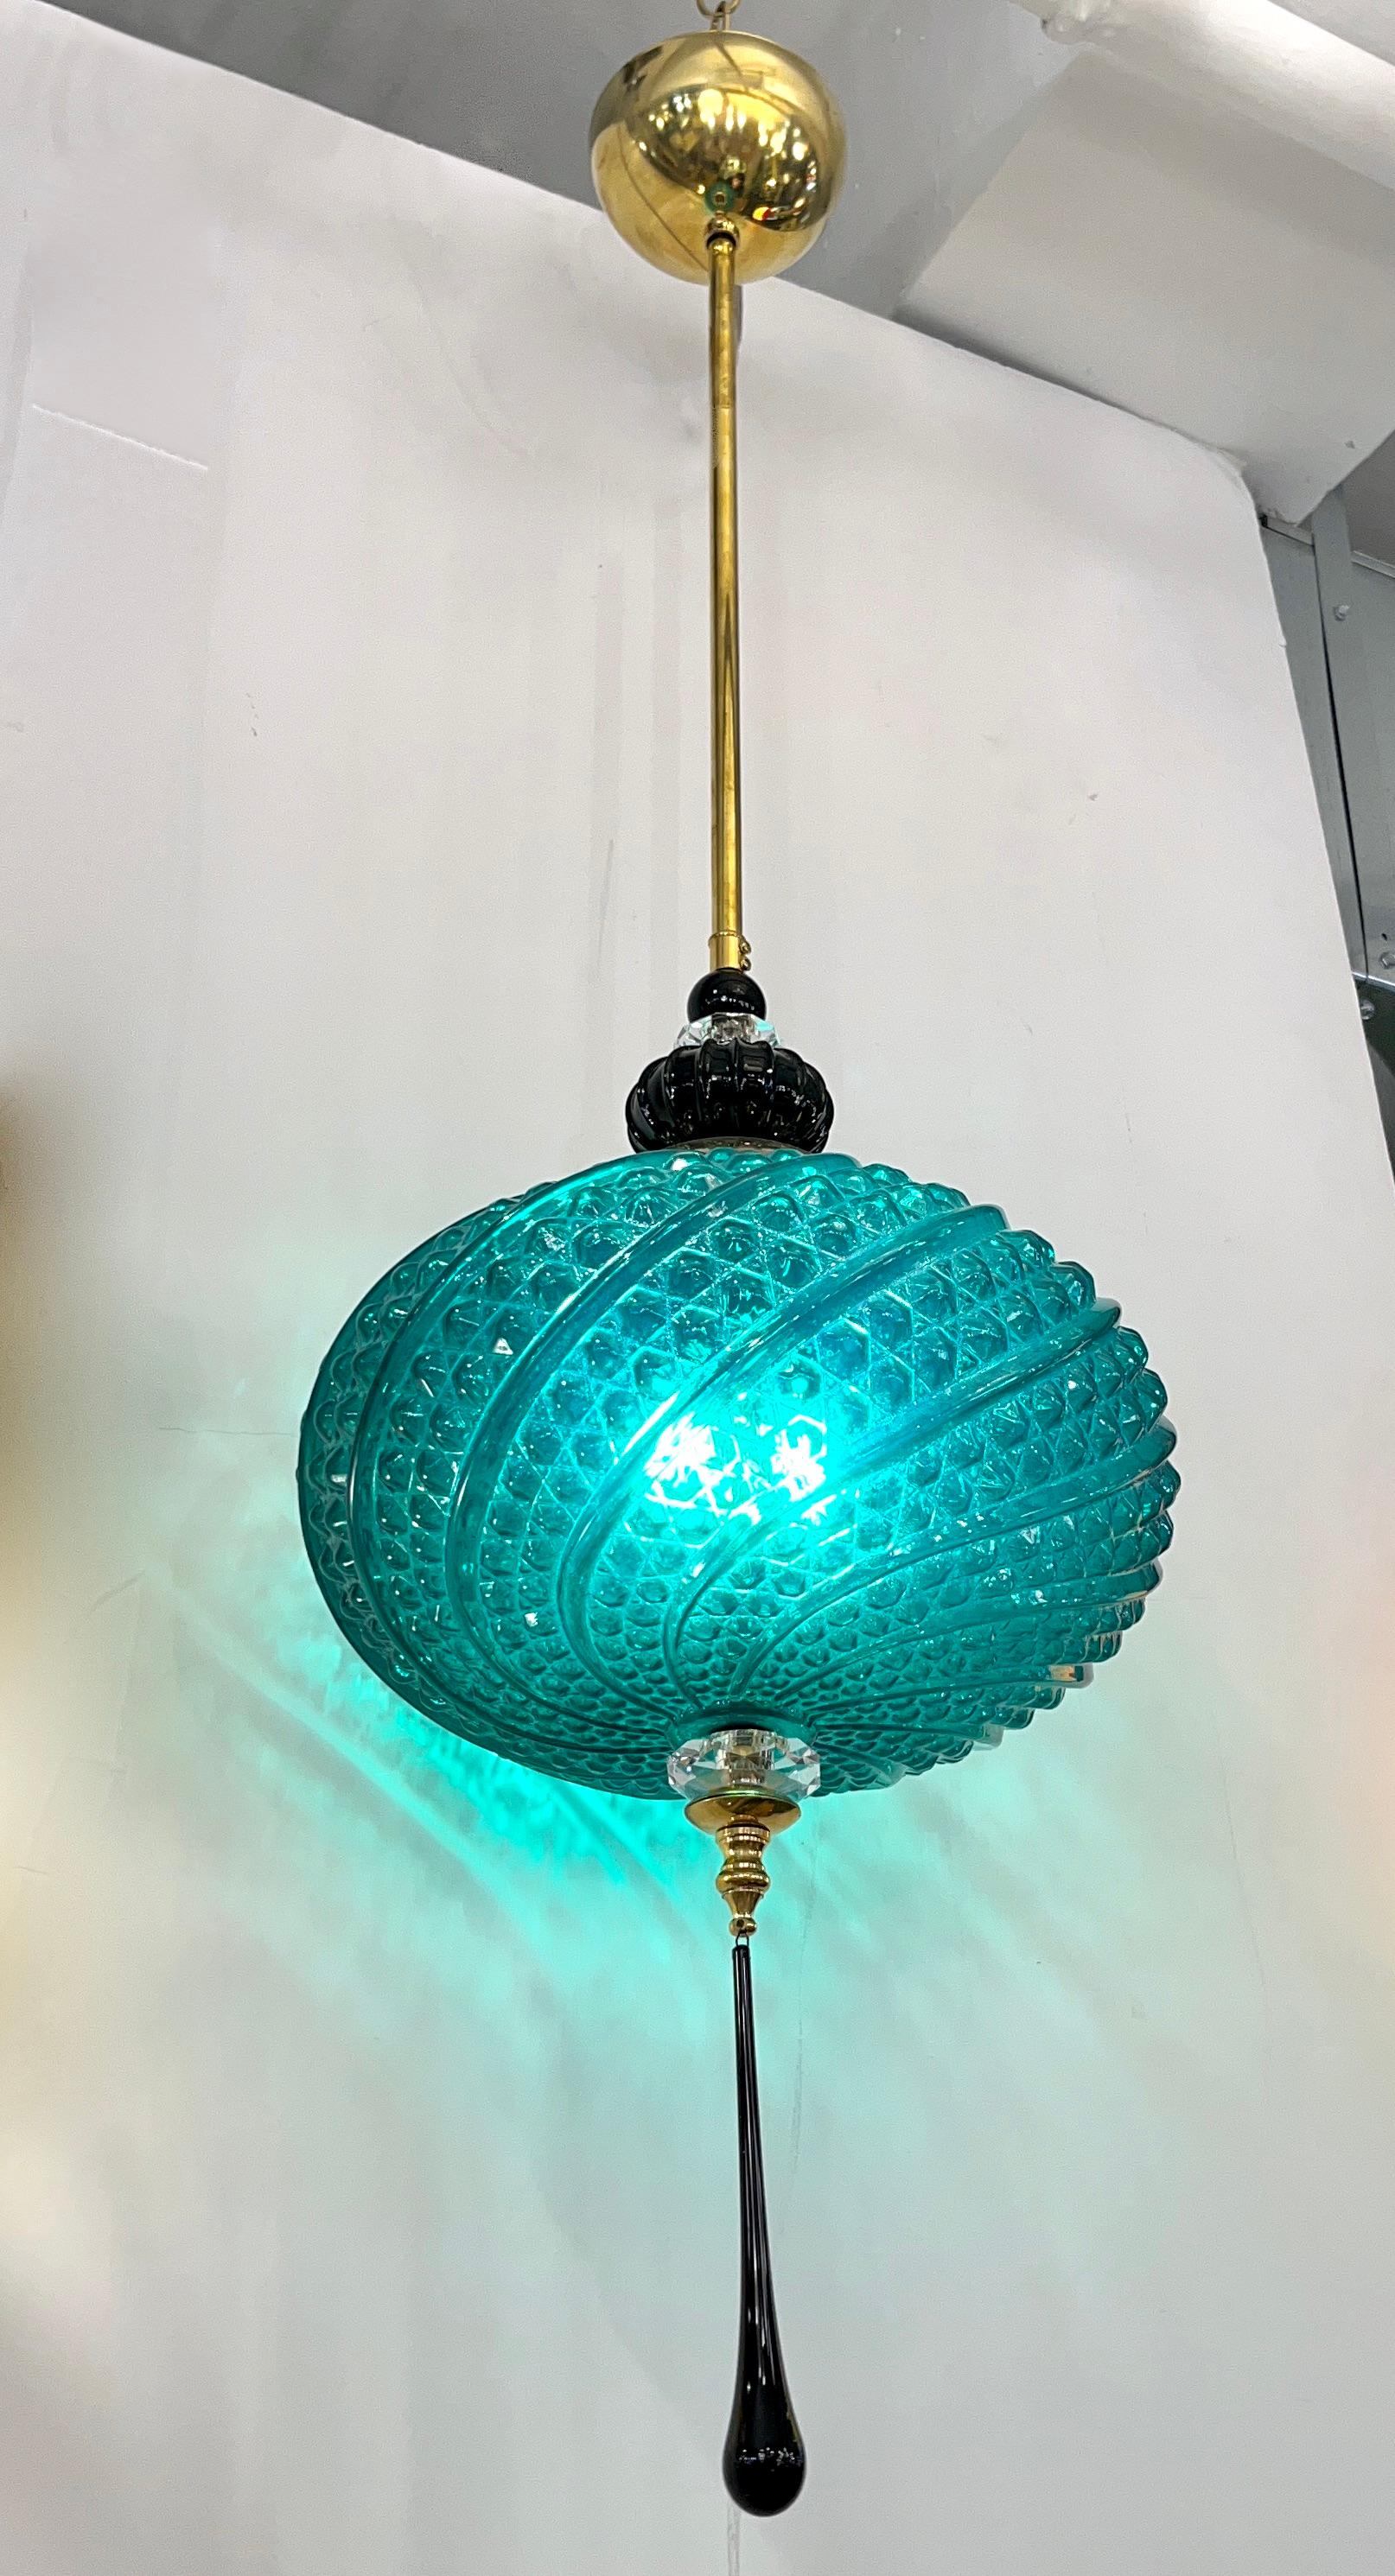 Contemporary orientalist style custom lantern pendant chandelier, of a modern Venetian geometric series with 4 shapes as per images, entirely custom made in Italy, here with brass hardware, the organic horizontal oval shape globe in an innovative